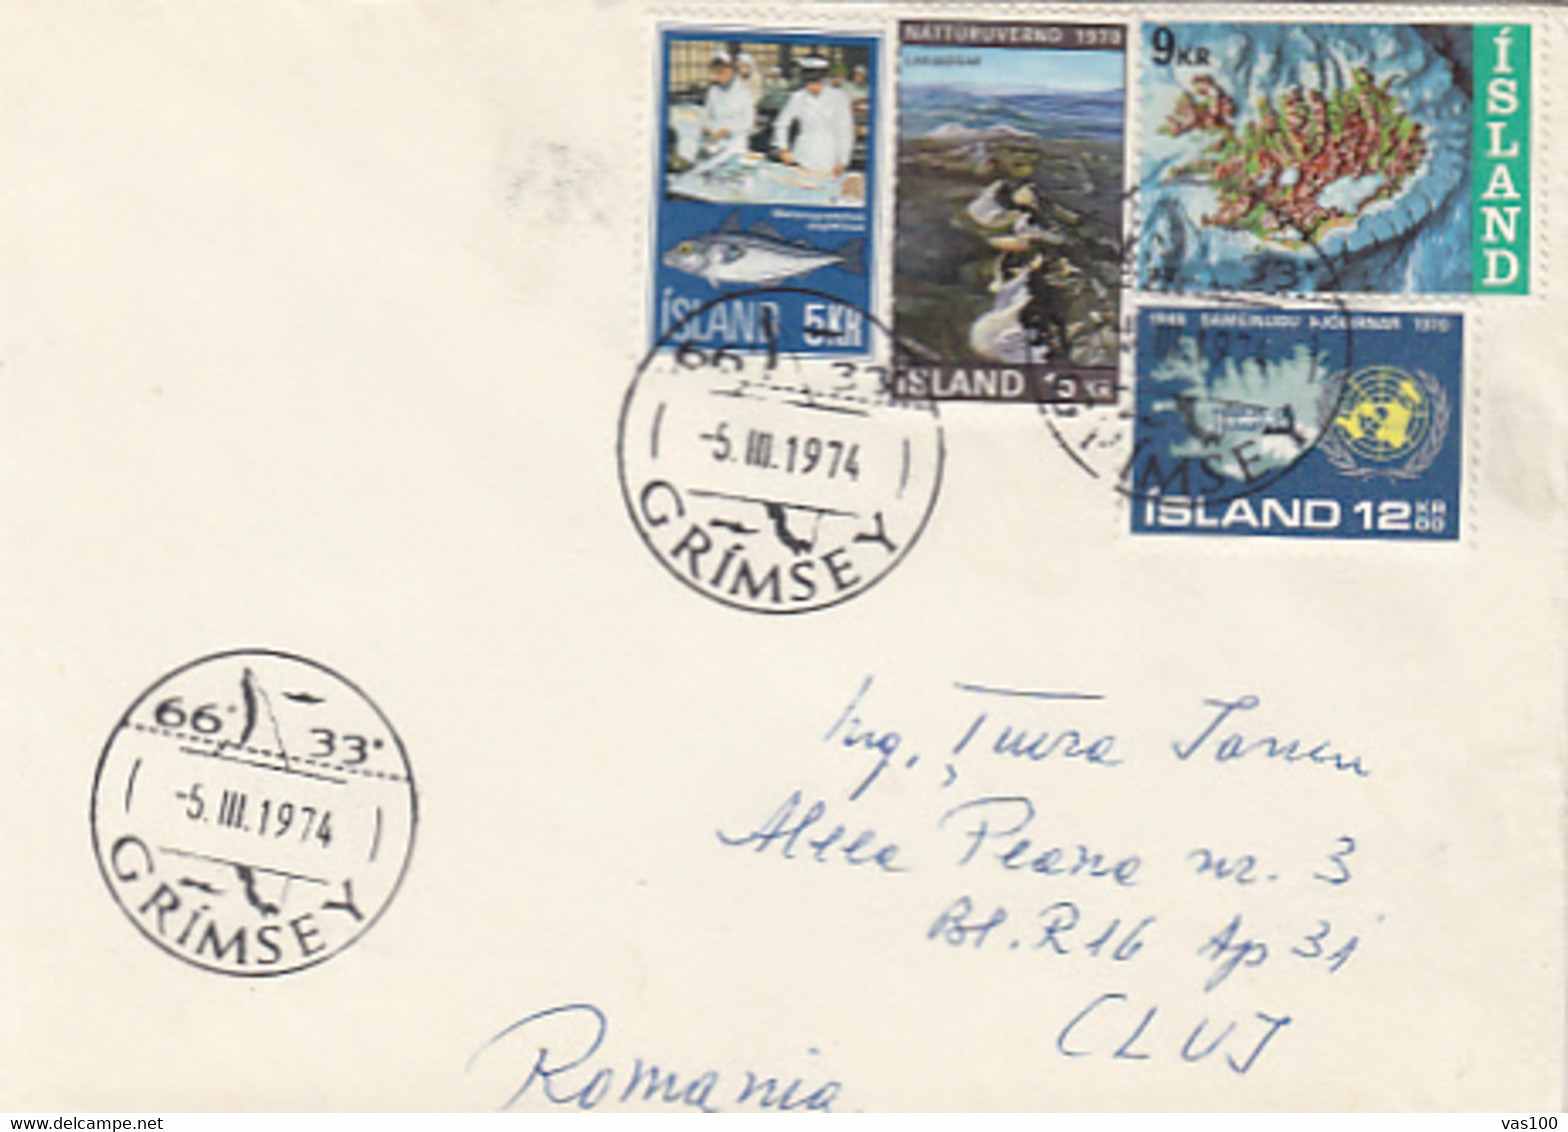 GRIMSAY ISLAND SPECIAL POSTMARK, FISH PROCESSING INDUSTRY, ISLAND VEWS STAMPS ON COVER, 1974, ICELAND - Covers & Documents